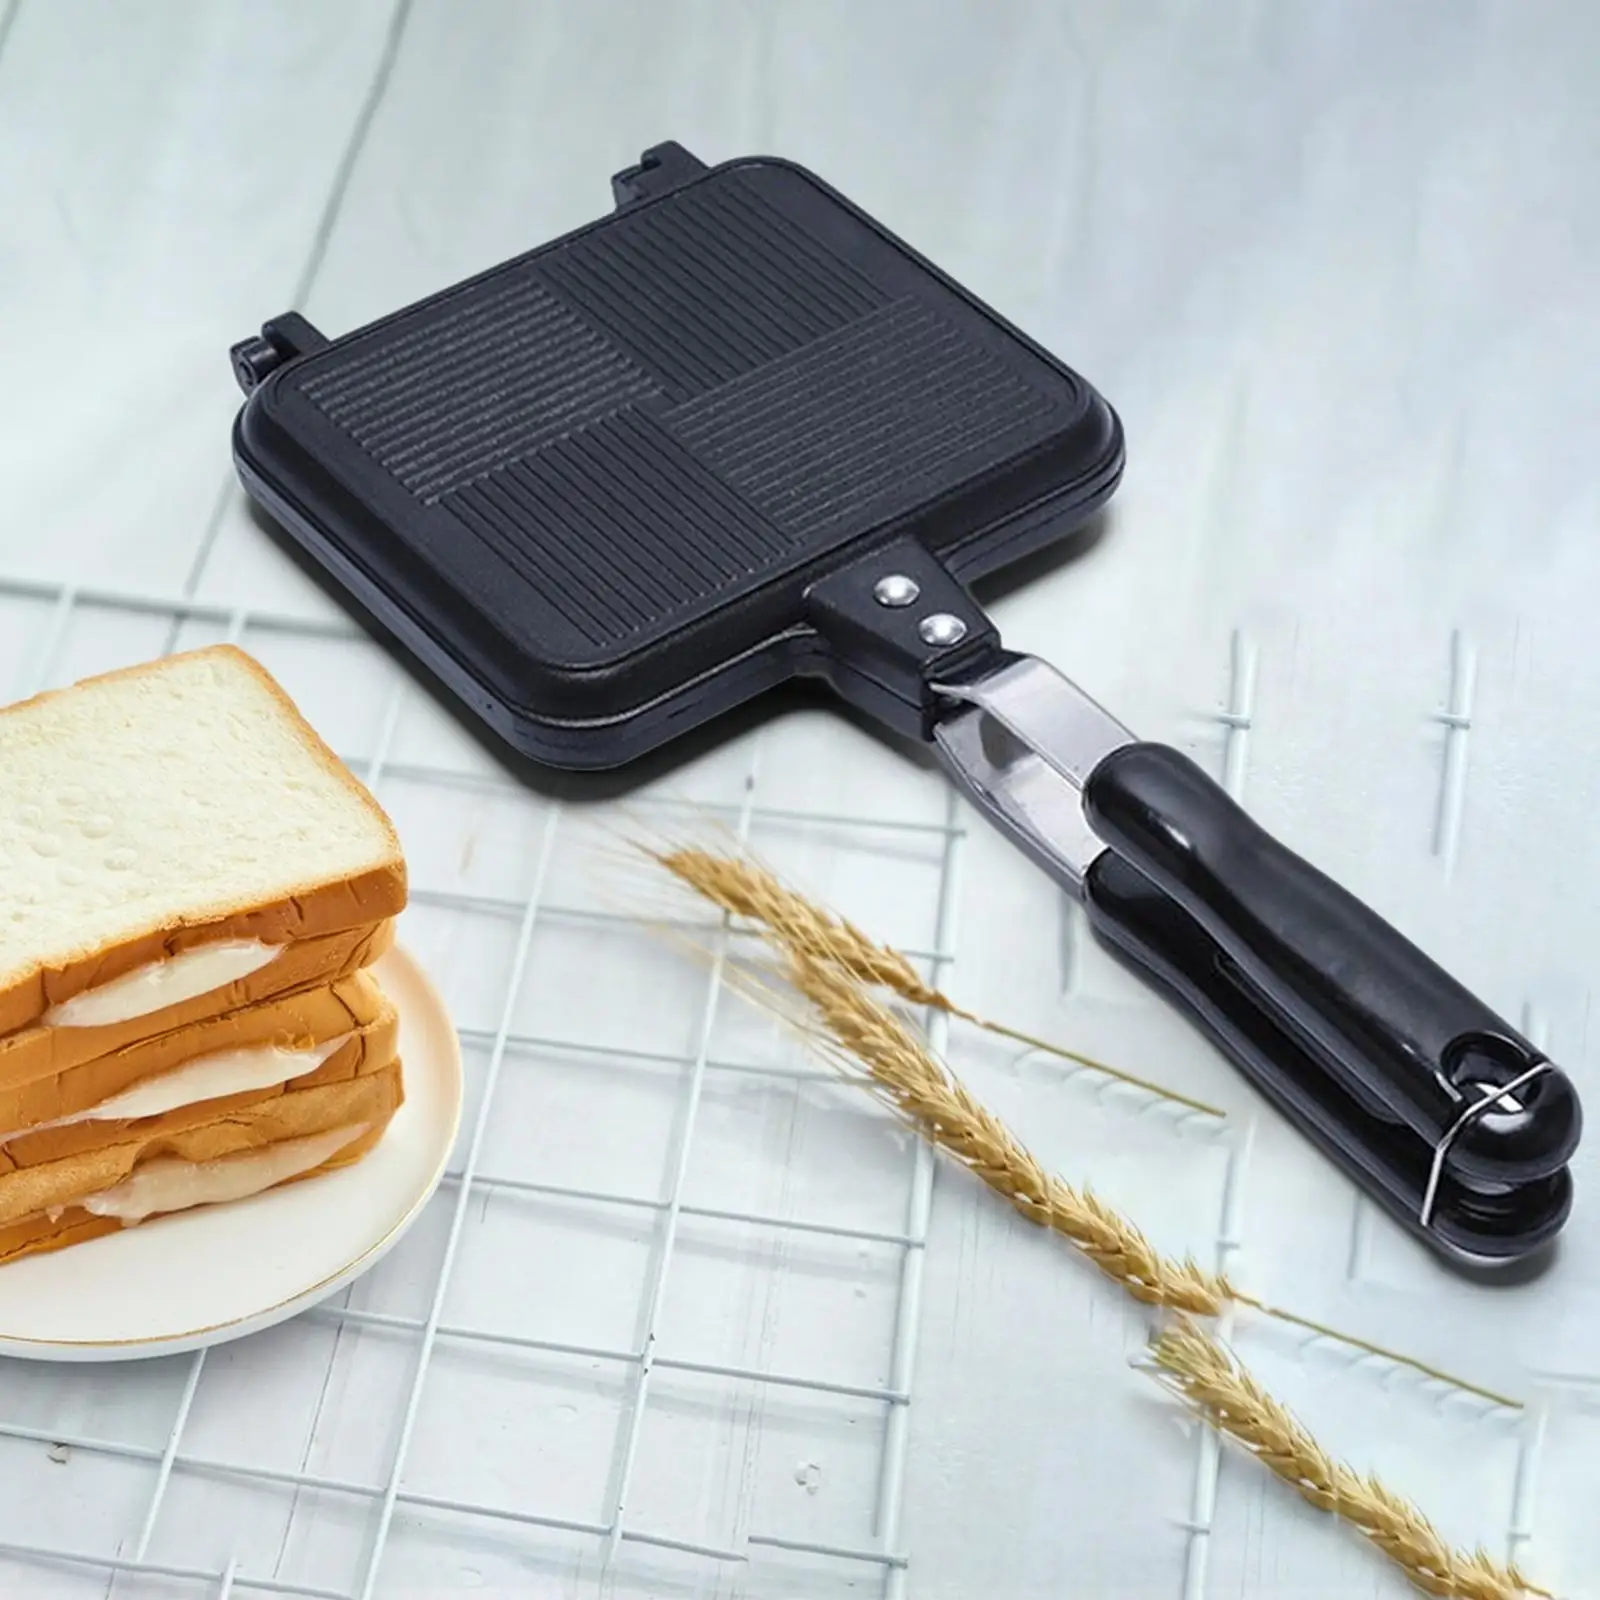 Double Sided Frying Pan Pancake Omelette Pan Kitchen Supplies flip Detachable Sandwich Maker Pan for camping Toast